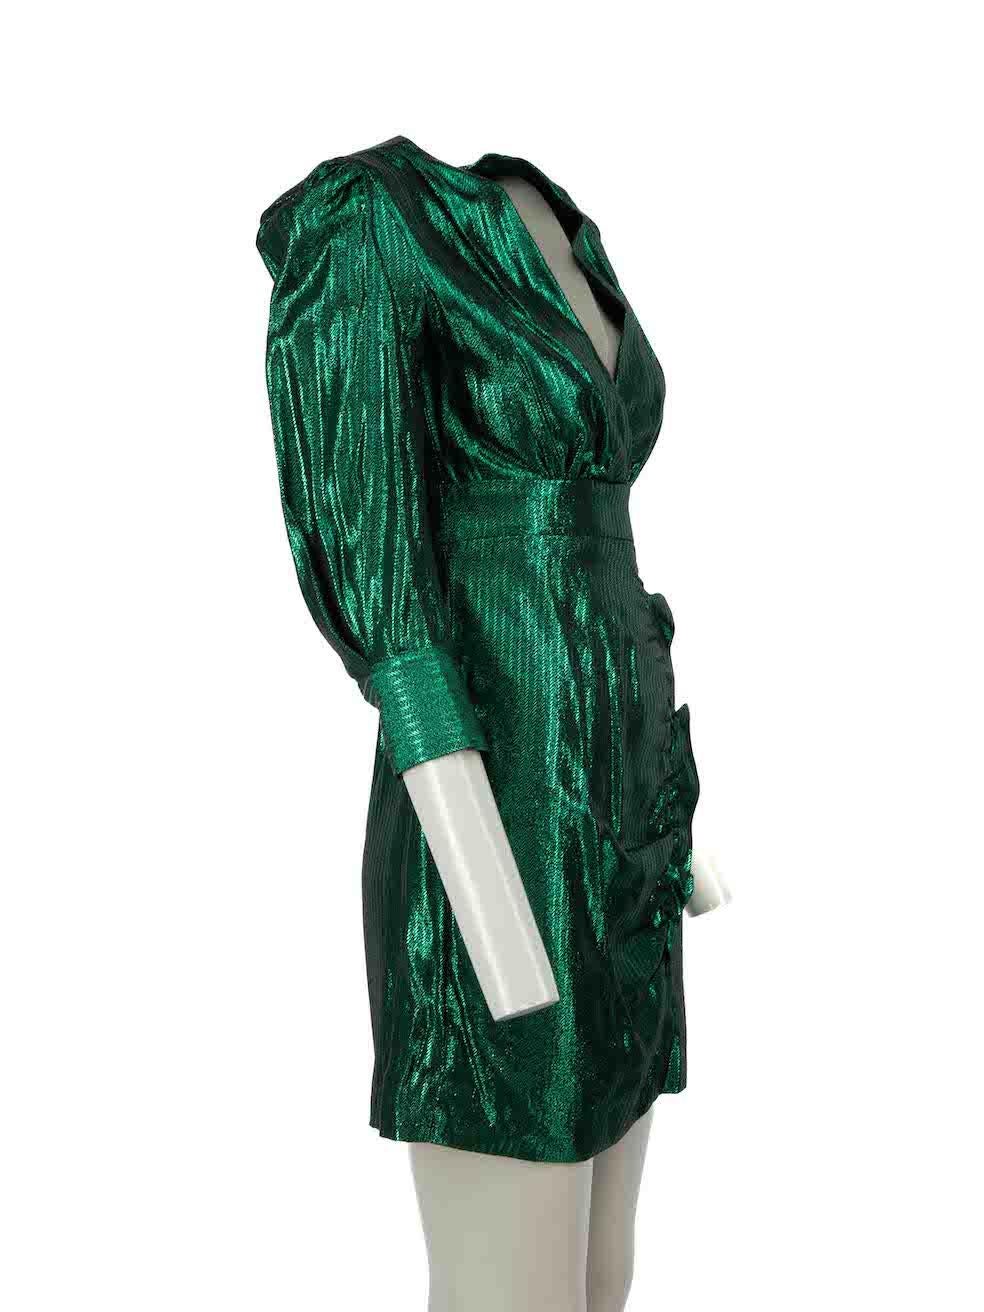 CONDITION is Never worn, with tags. No visible wear to dress is evident on this new Maje designer resale item.
 
Details
Green metallic
Viscose
Dress
Long sleeves
V-neck
Mini
Buttoned cuffs
Side zip fastening

Made in Bulgaria
 
Composition
70%